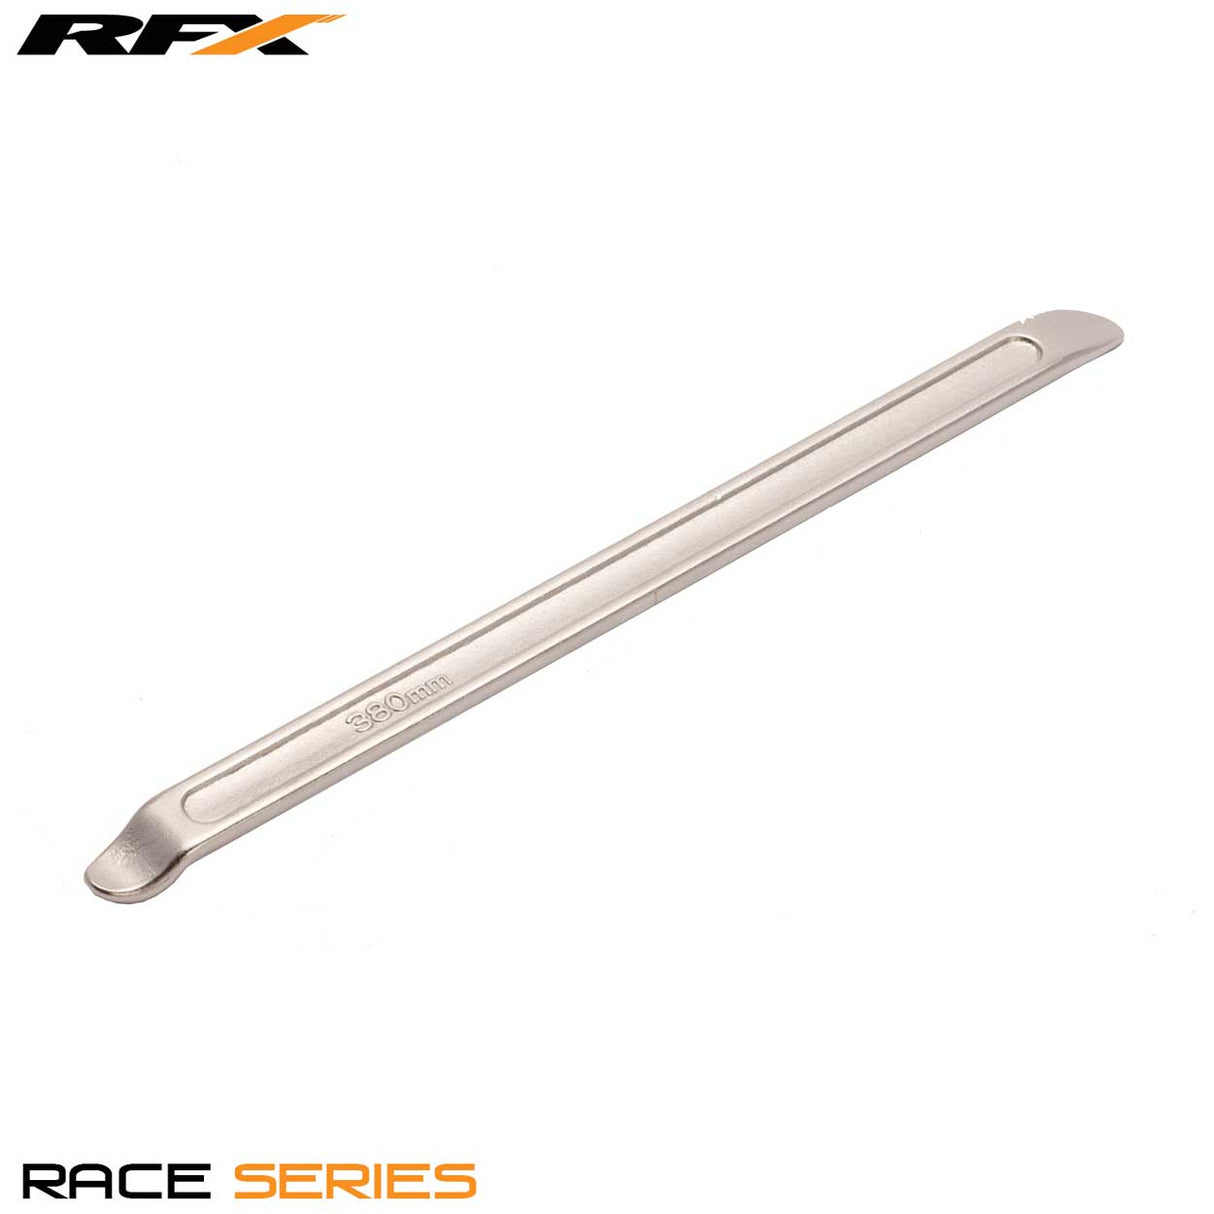 RFX Race Dual Spoon end Tyre Lever Universal 380mm / 15in Long